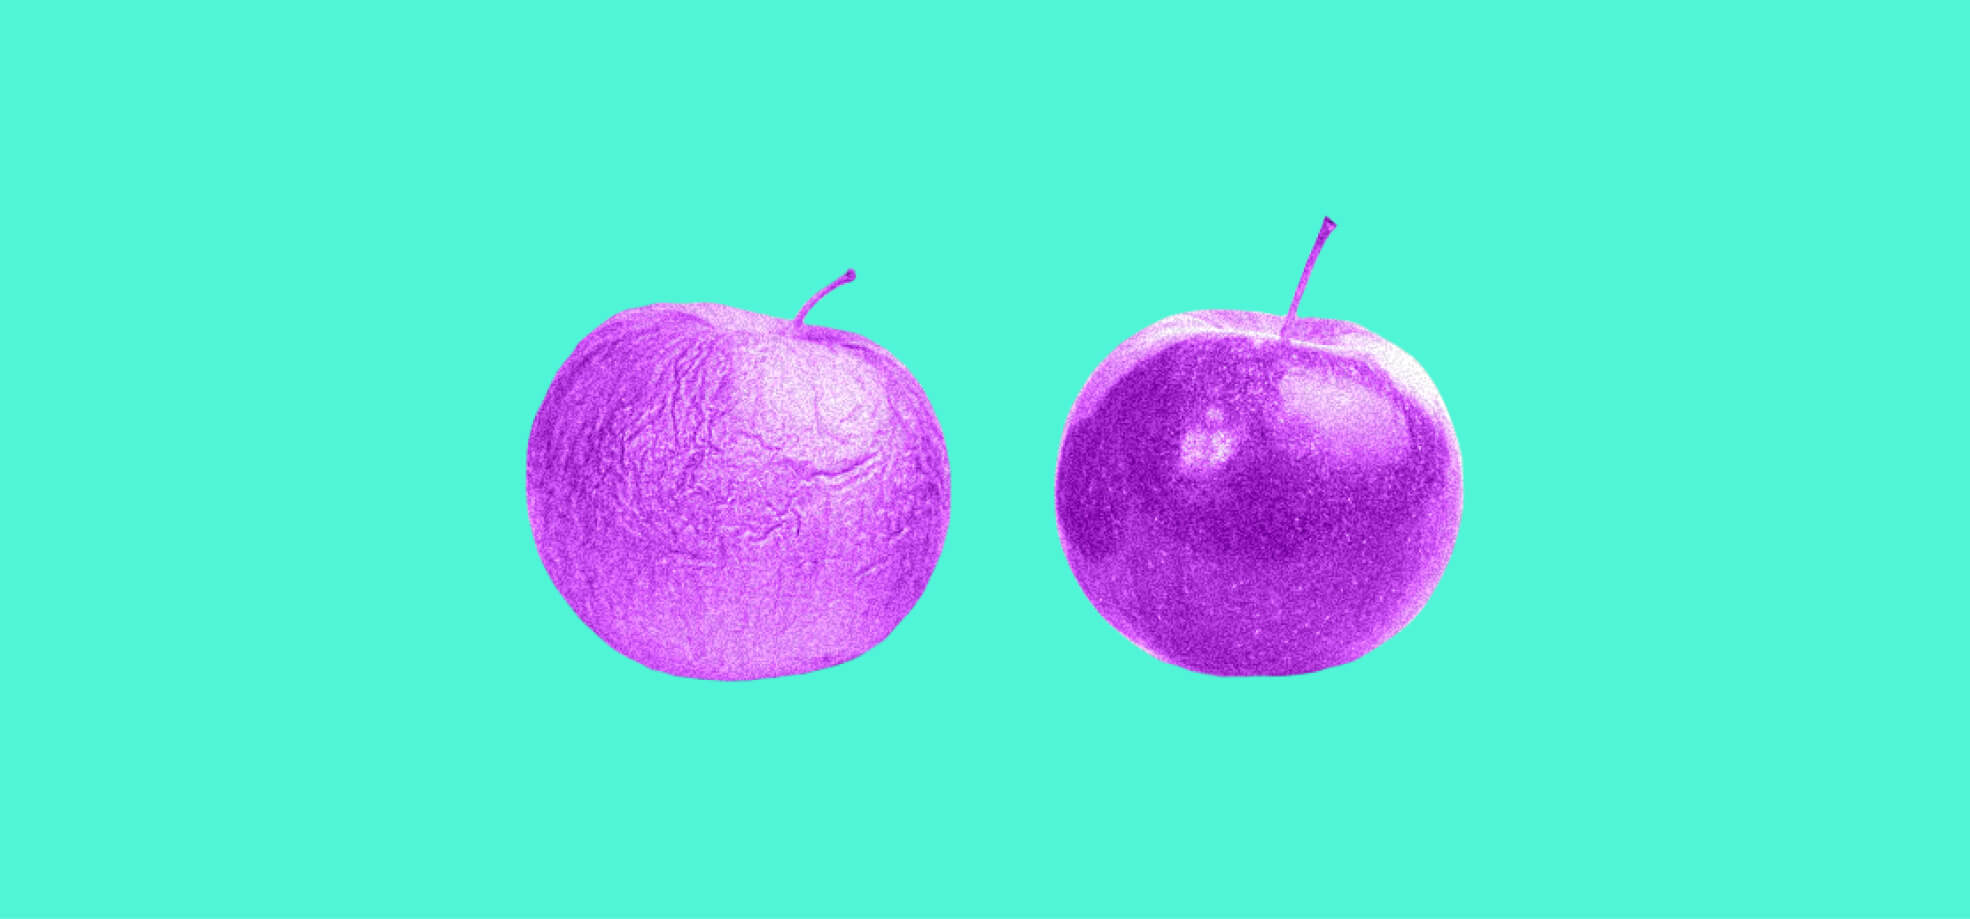 two apples on green background